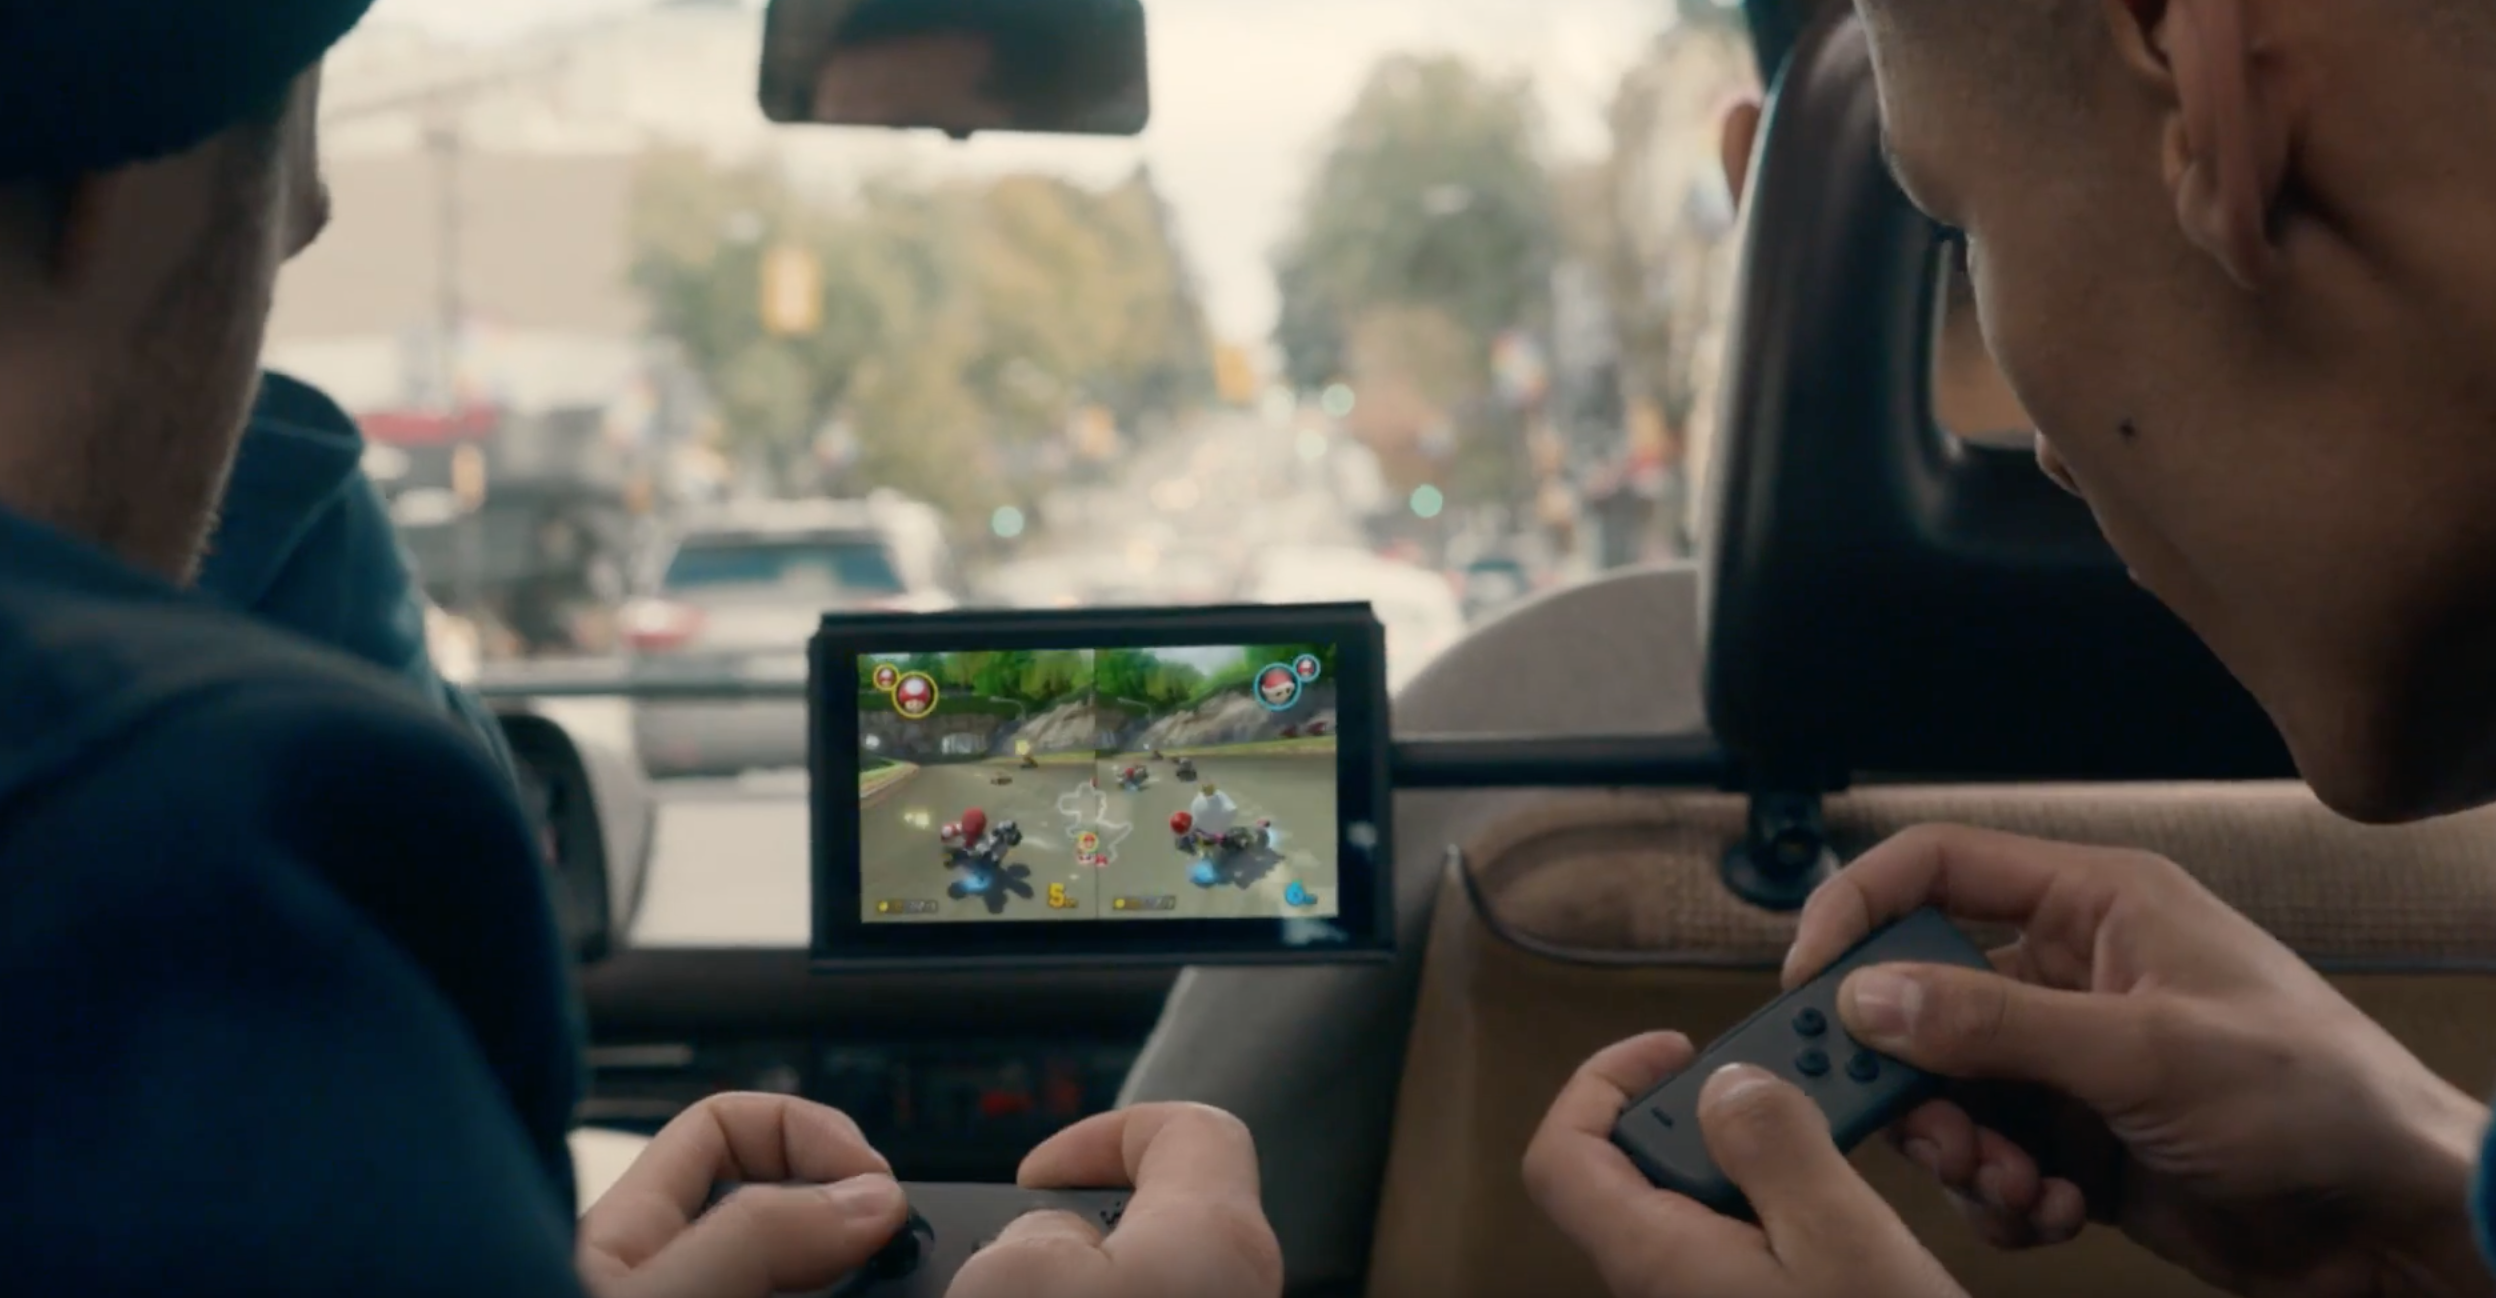 Nintendo unveils first look at new Switch device